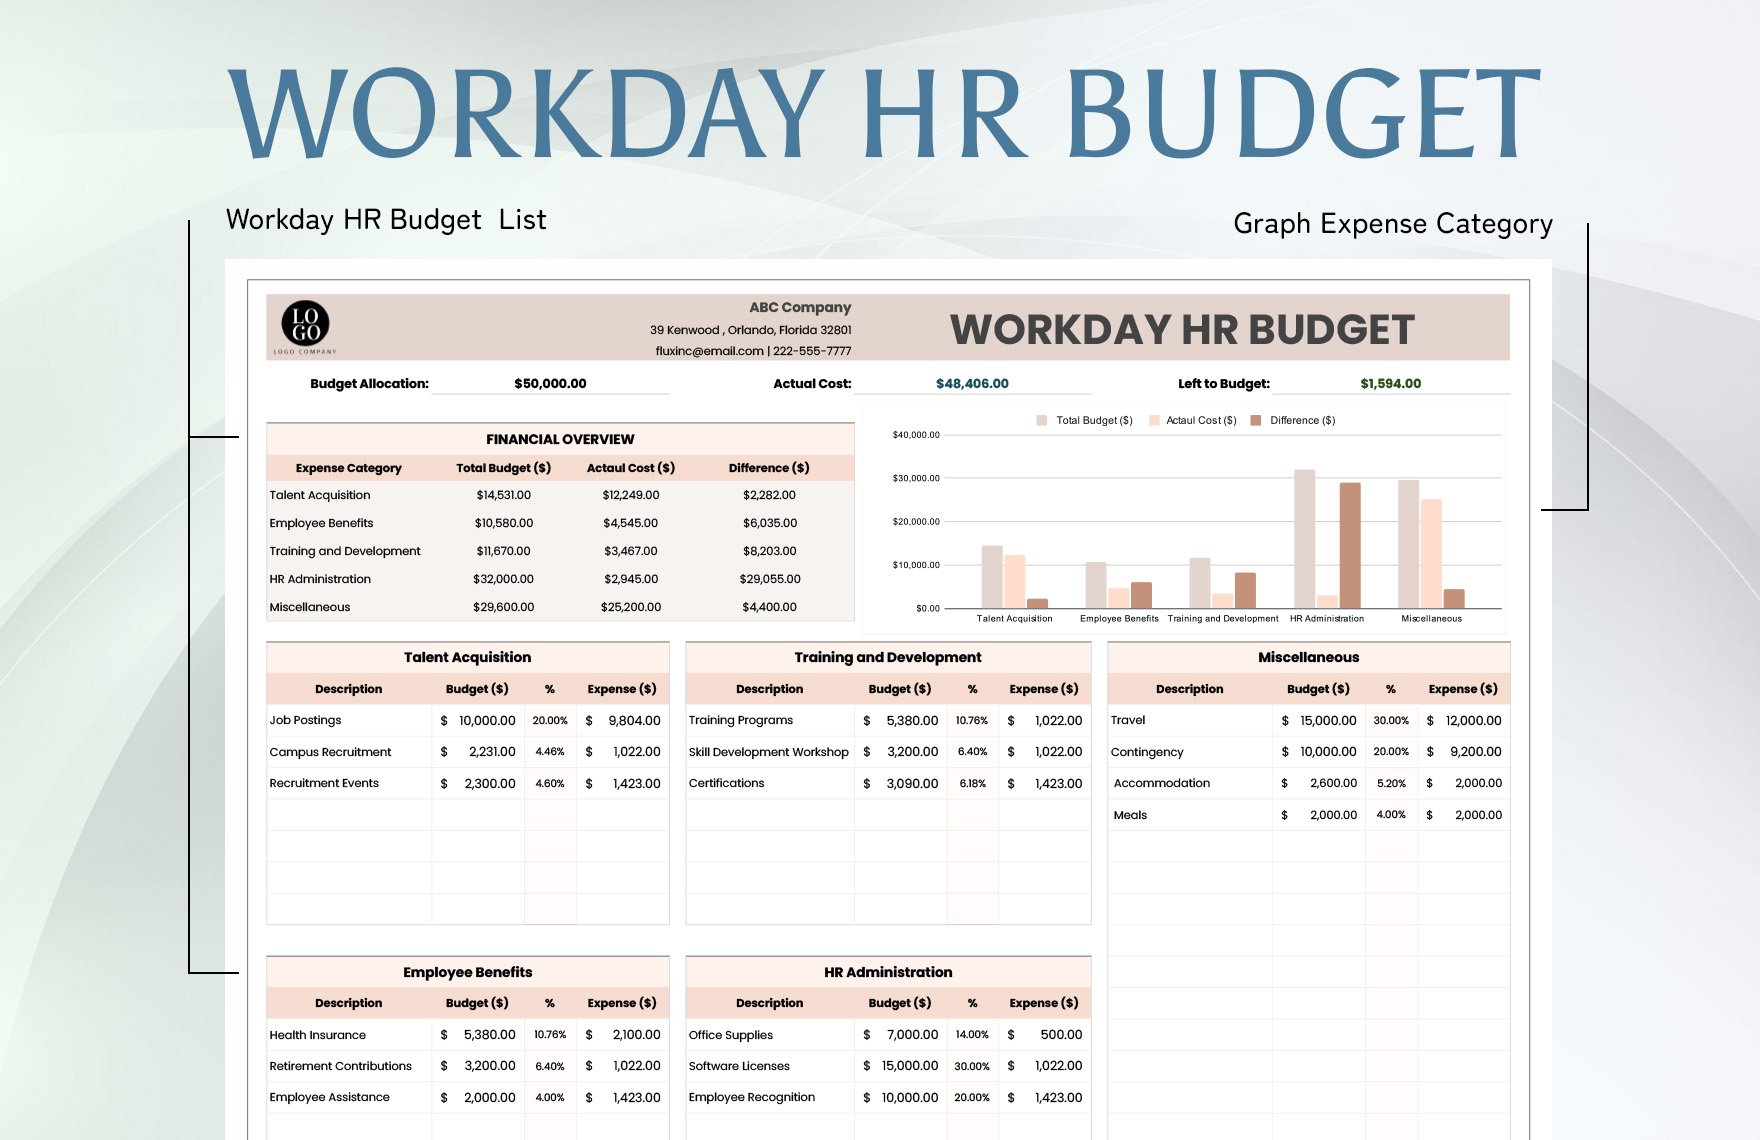 Workday HR Budget Template